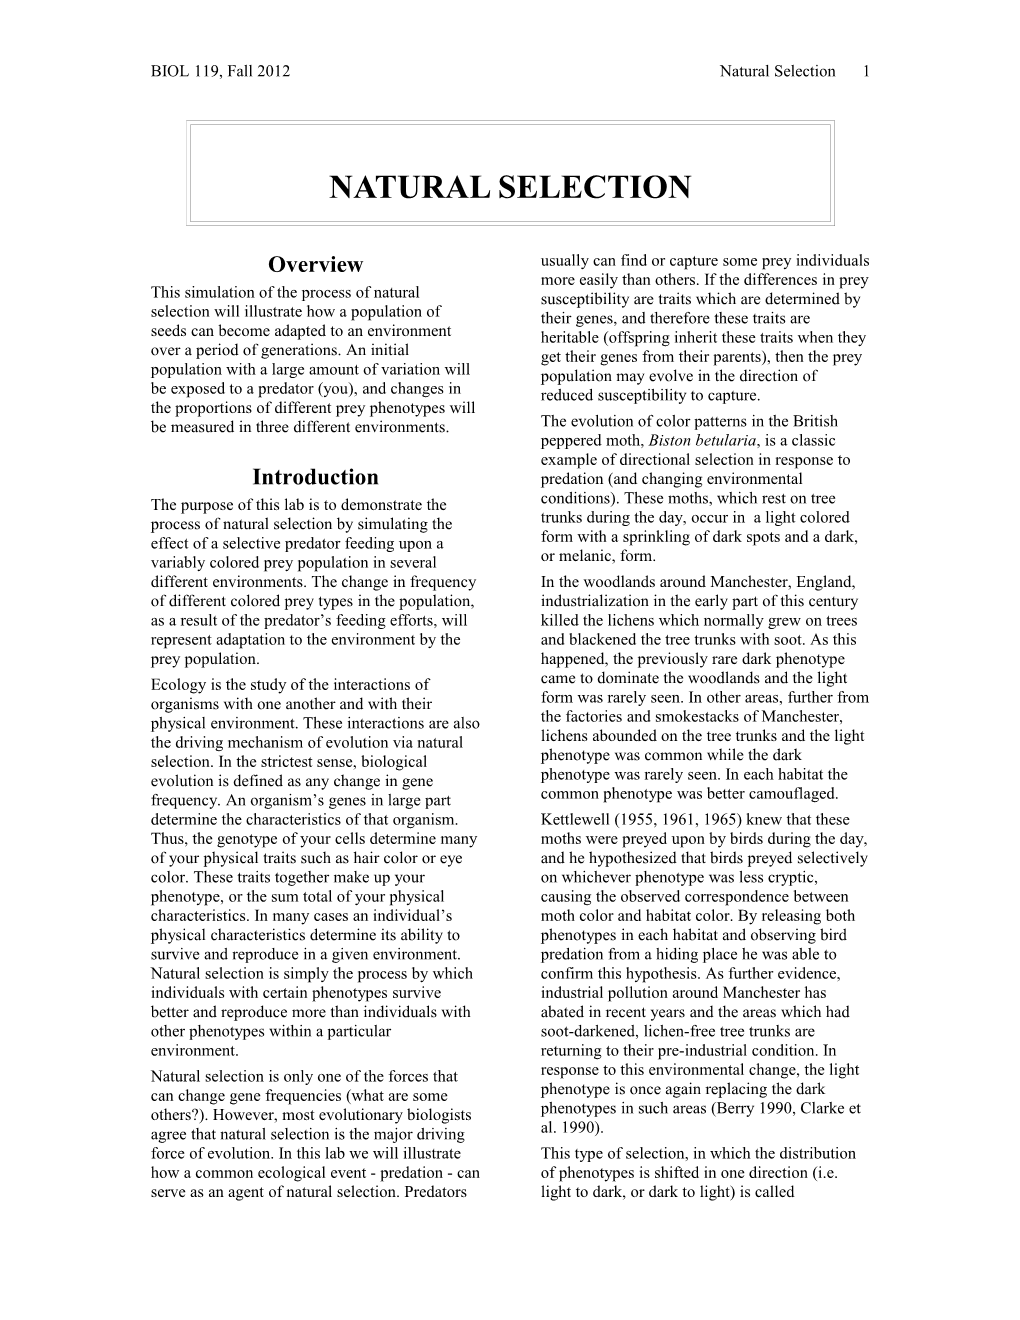 Introduction to Natural Selection